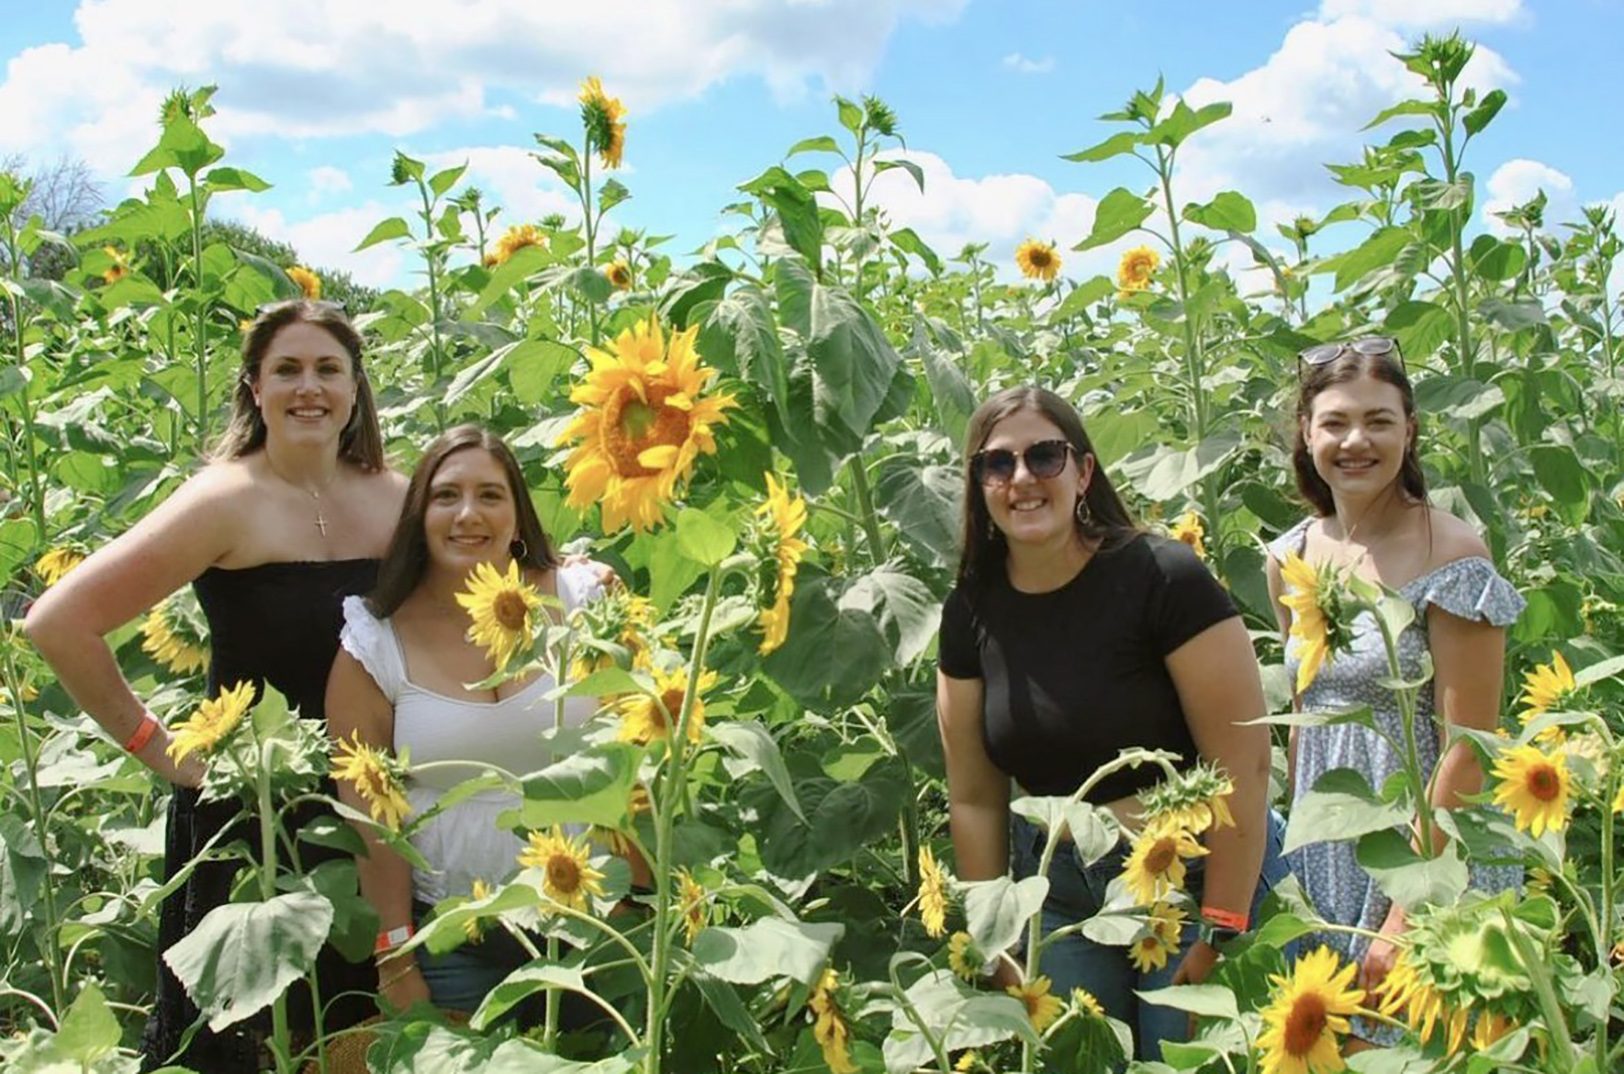 Sunflower fest opens at KC Wine Co as popular pumpkin patch grows into year-round destination